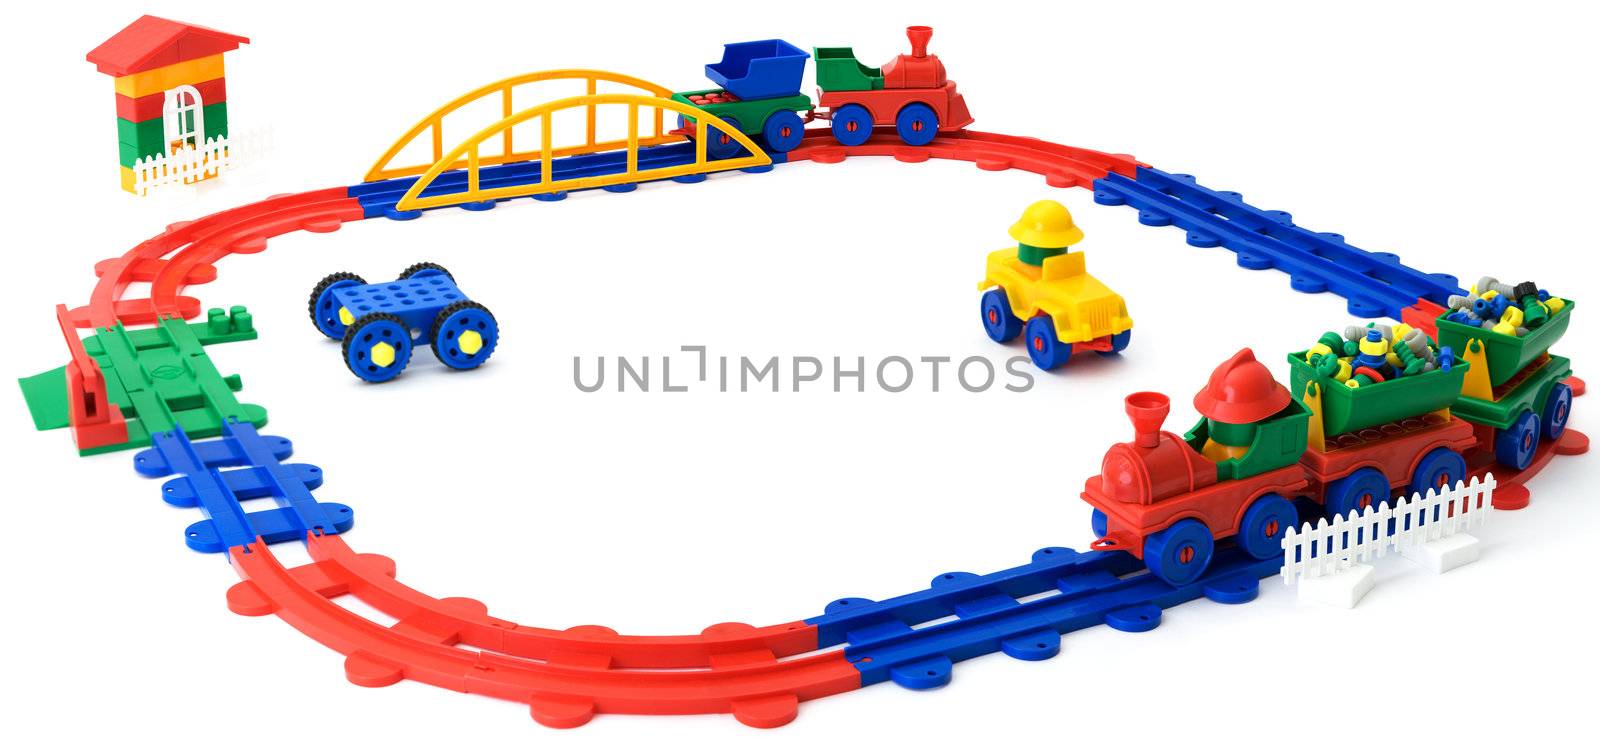 The children's plastic colour railway it is isolated on a white background